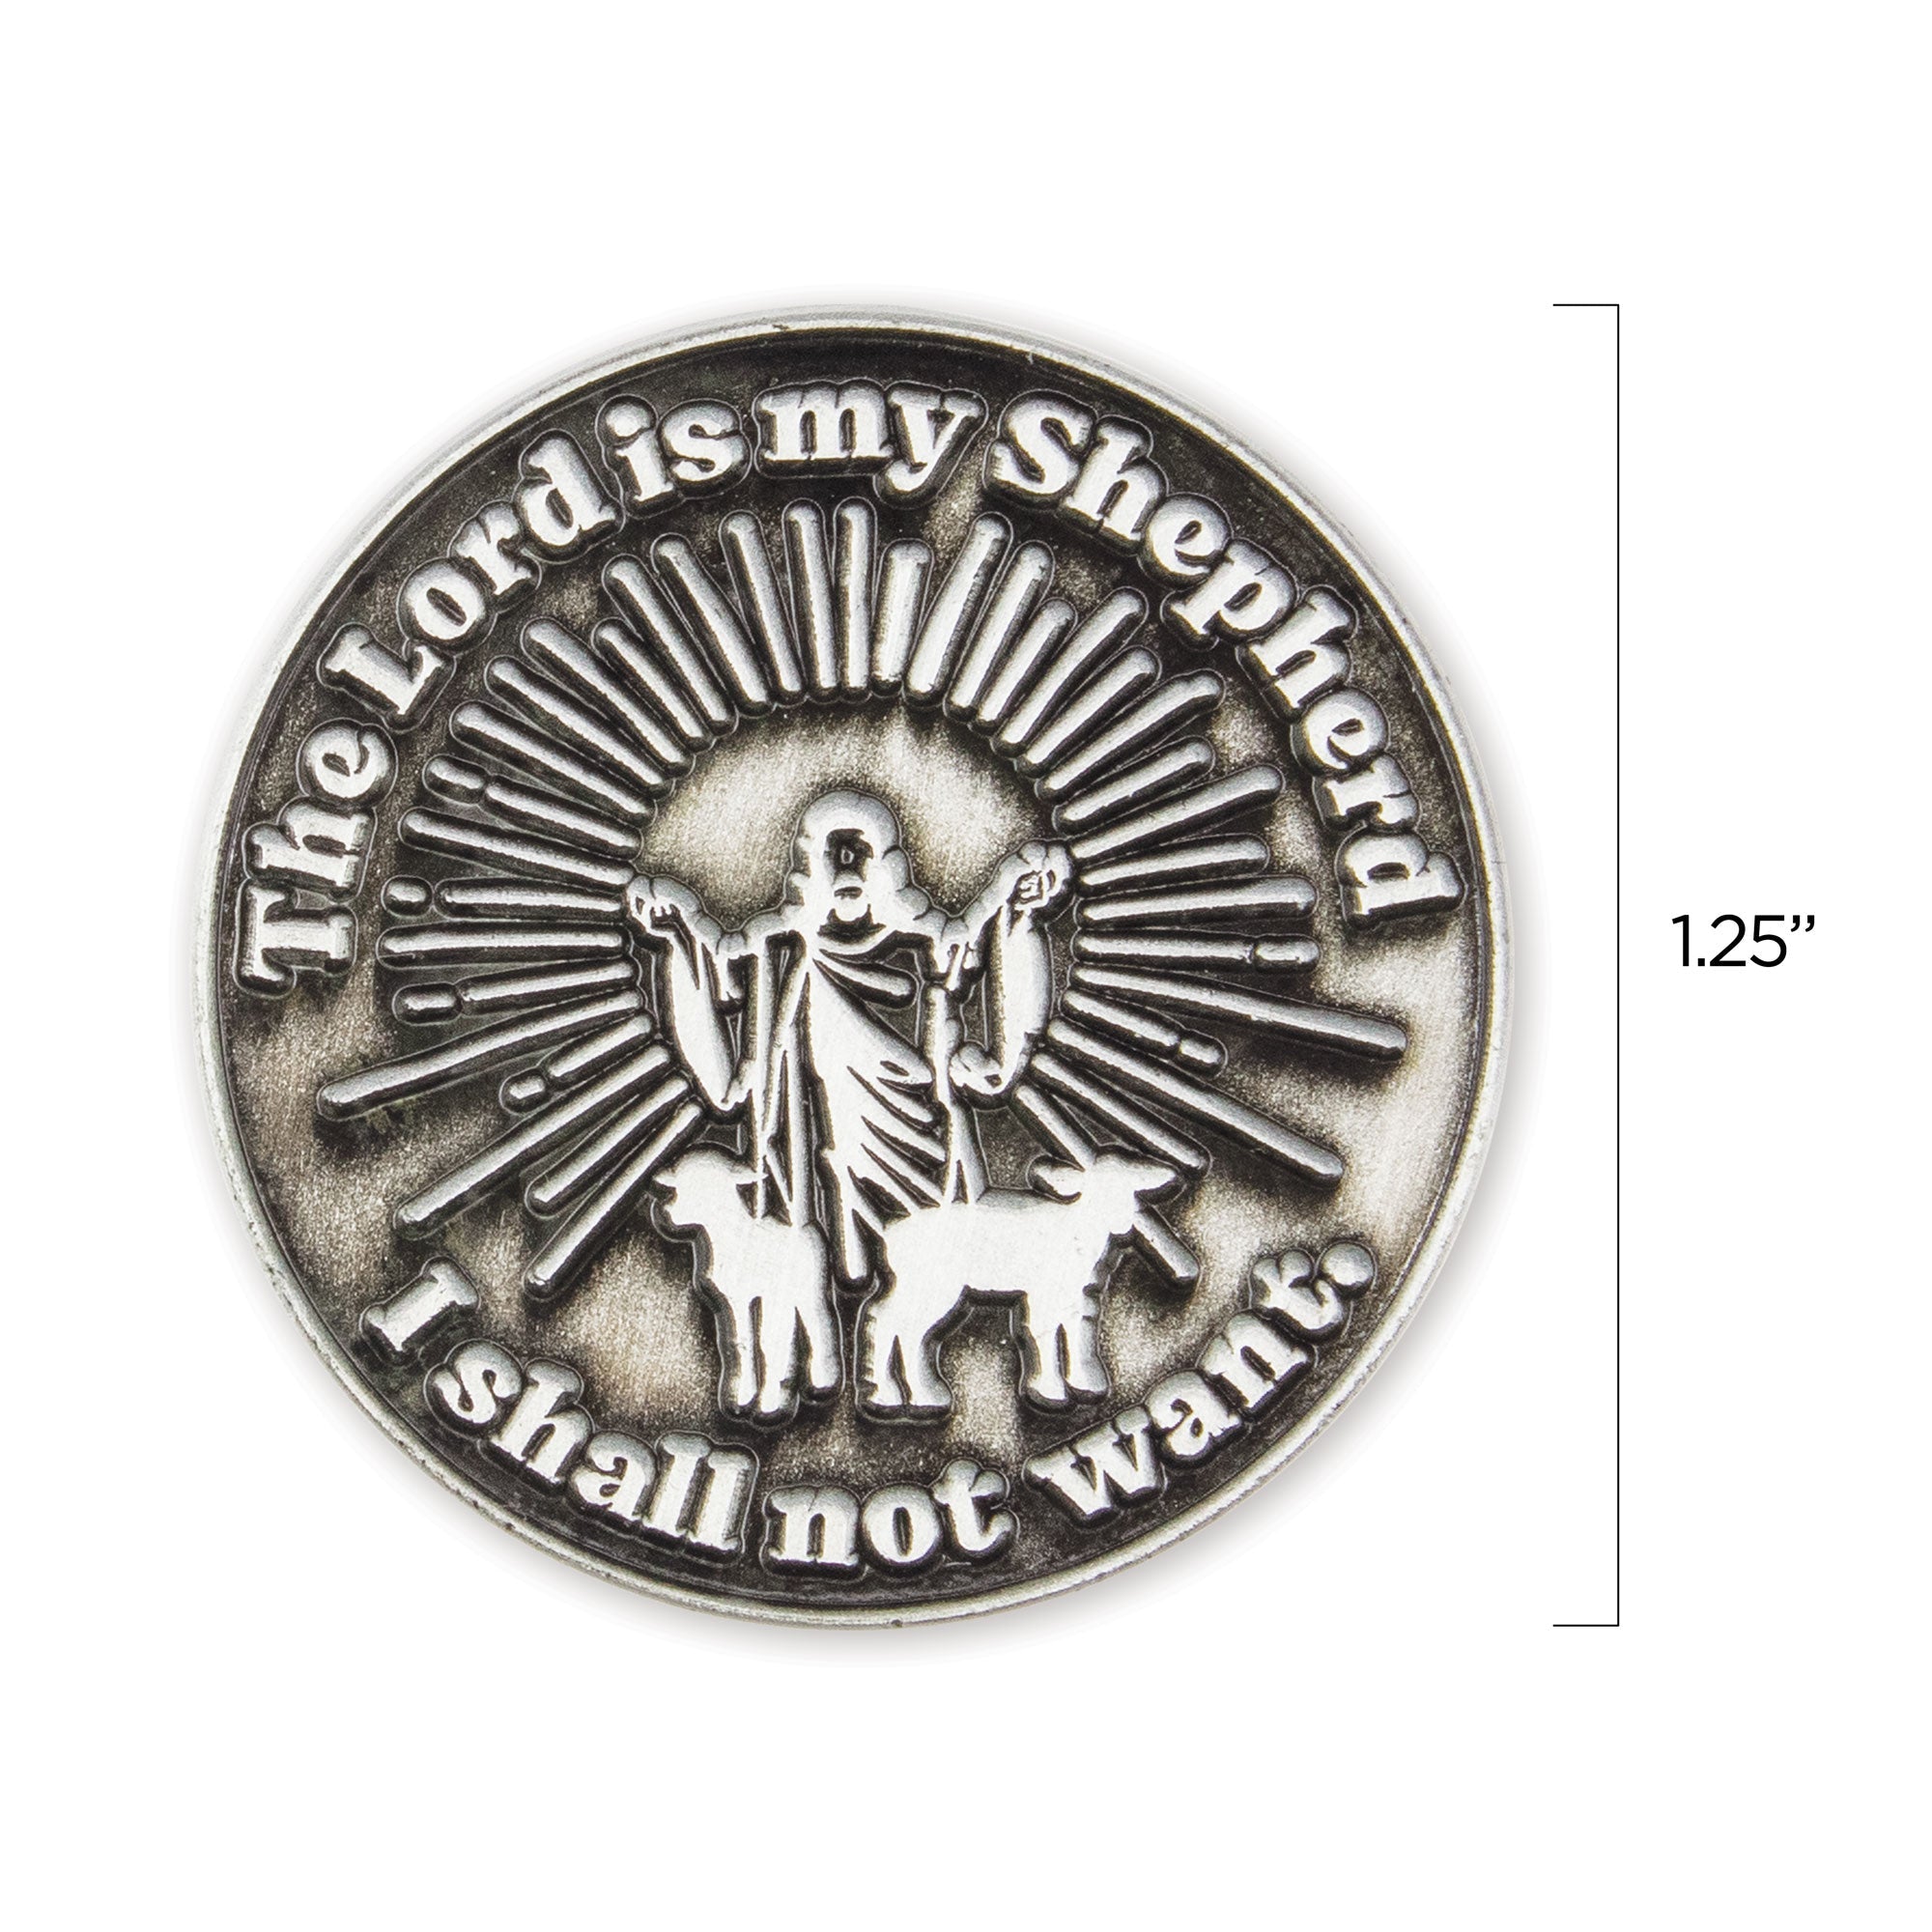 The Lord is My Shepherd Love Expression Coin